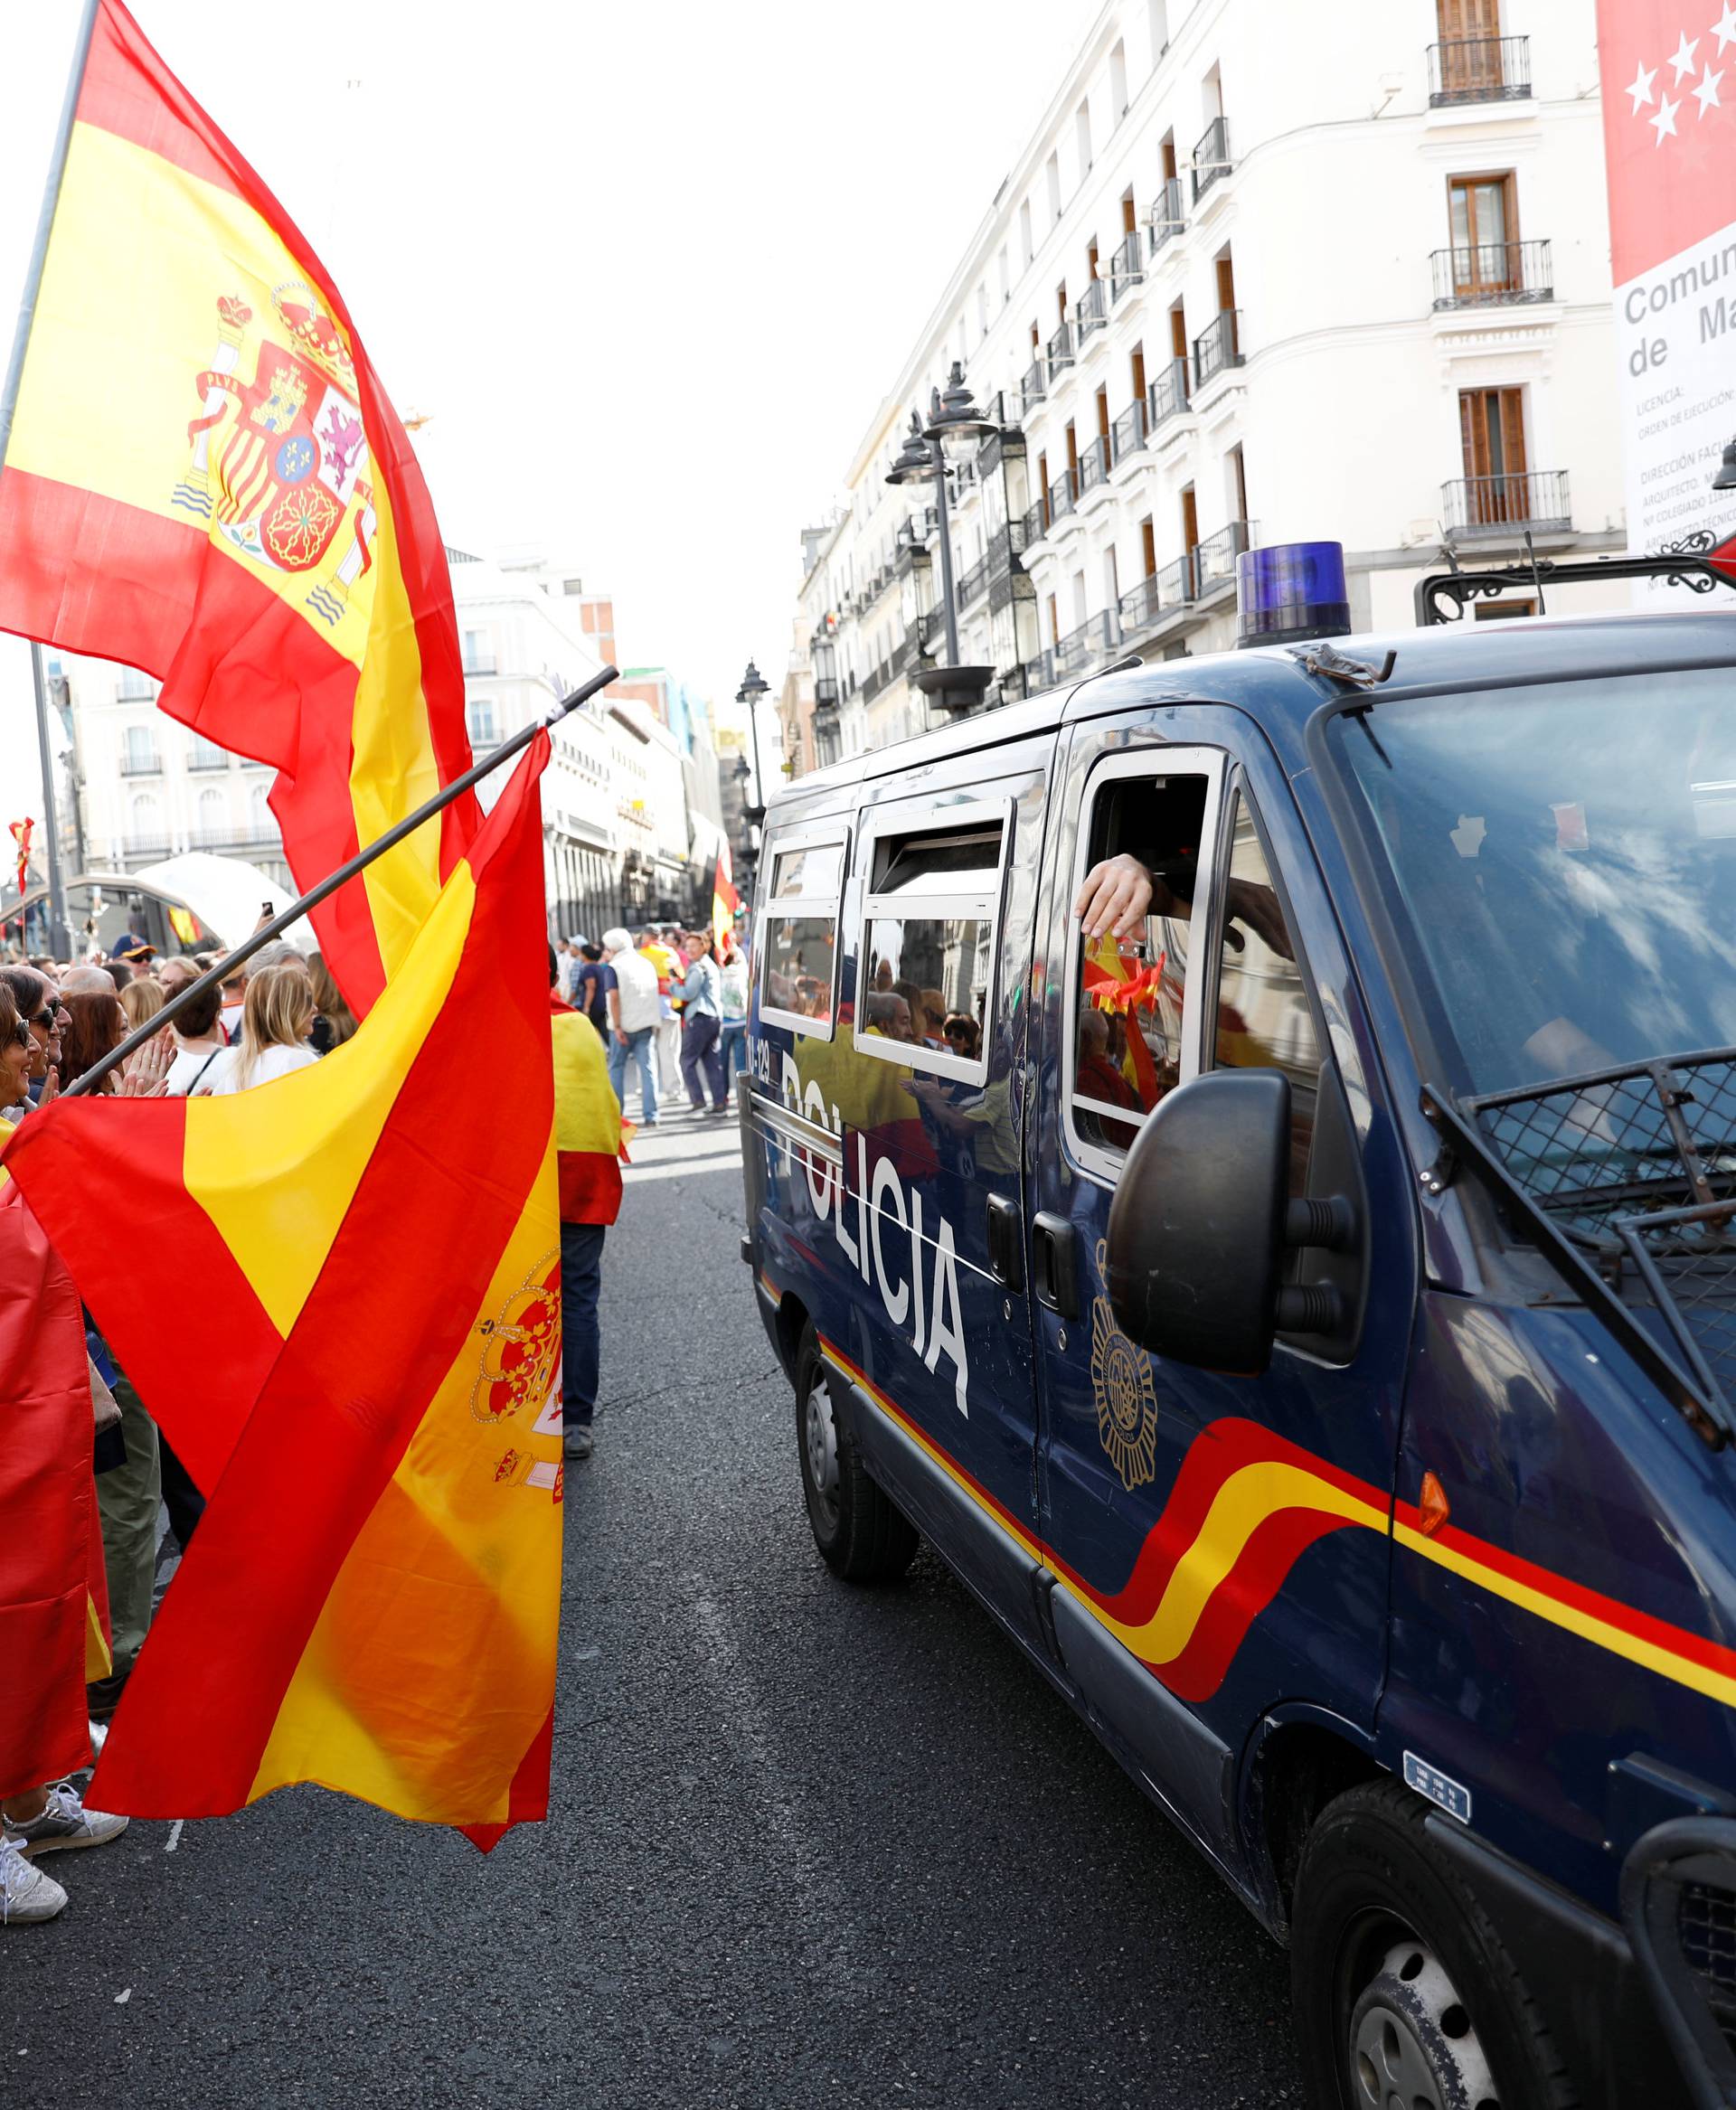 Demonstrators wave Spanish flags and support police during a demonstration in favor of a unified Spain on the day of a banned independence referendum in Catalonia, in Madrid